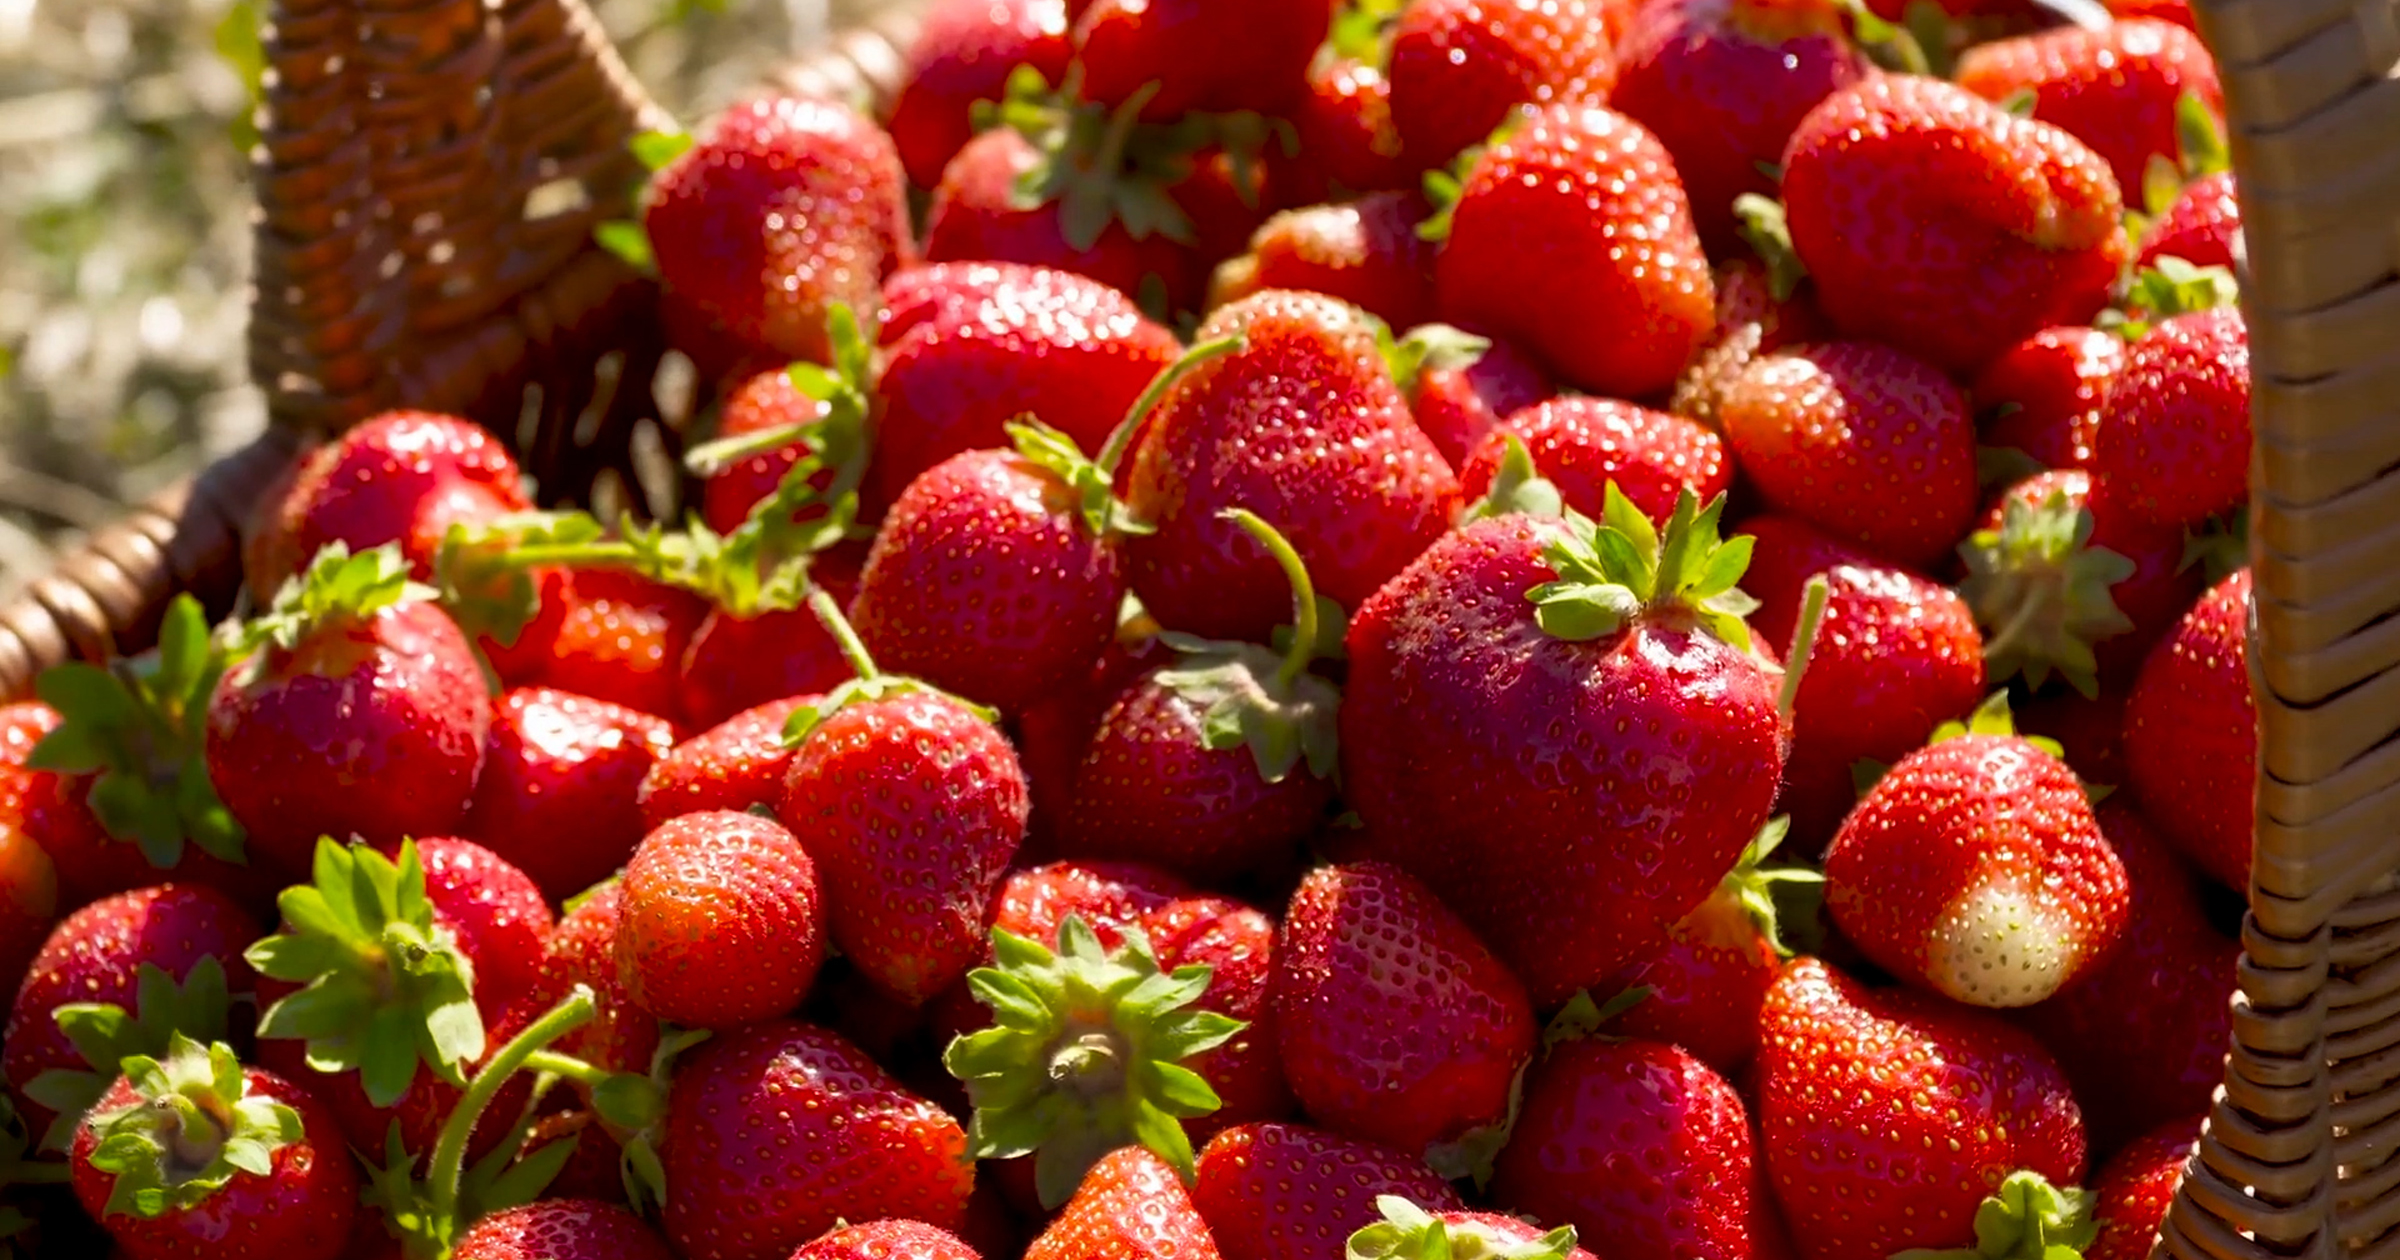 W&M Research: Junk DNA and the Strawberry Genome